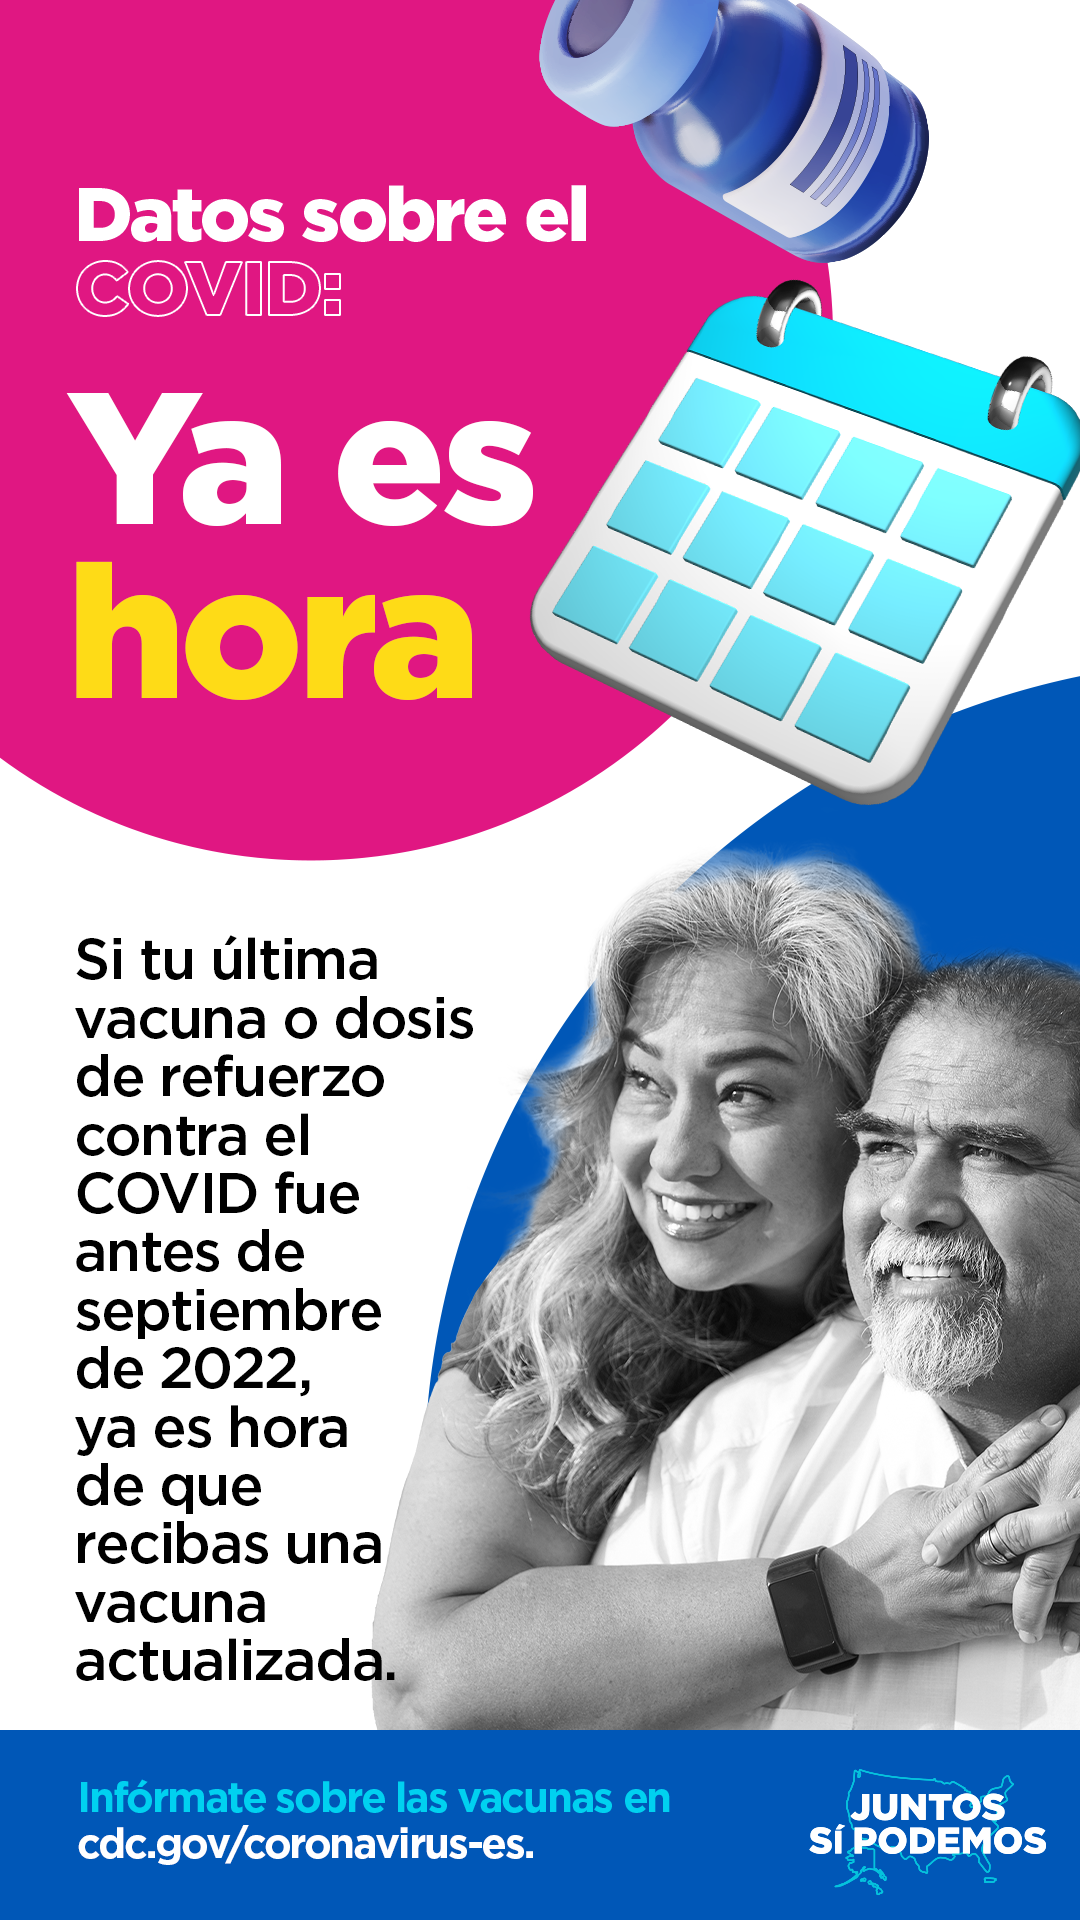 An older adult couple embrace and smile. Spanish text reads, "COVID Facts: It’s Time. If your last COVID vaccine or booster was before September 2022, it’s time for your updated vaccine. Get vaccines facts at cdc.gov/coronavirus"